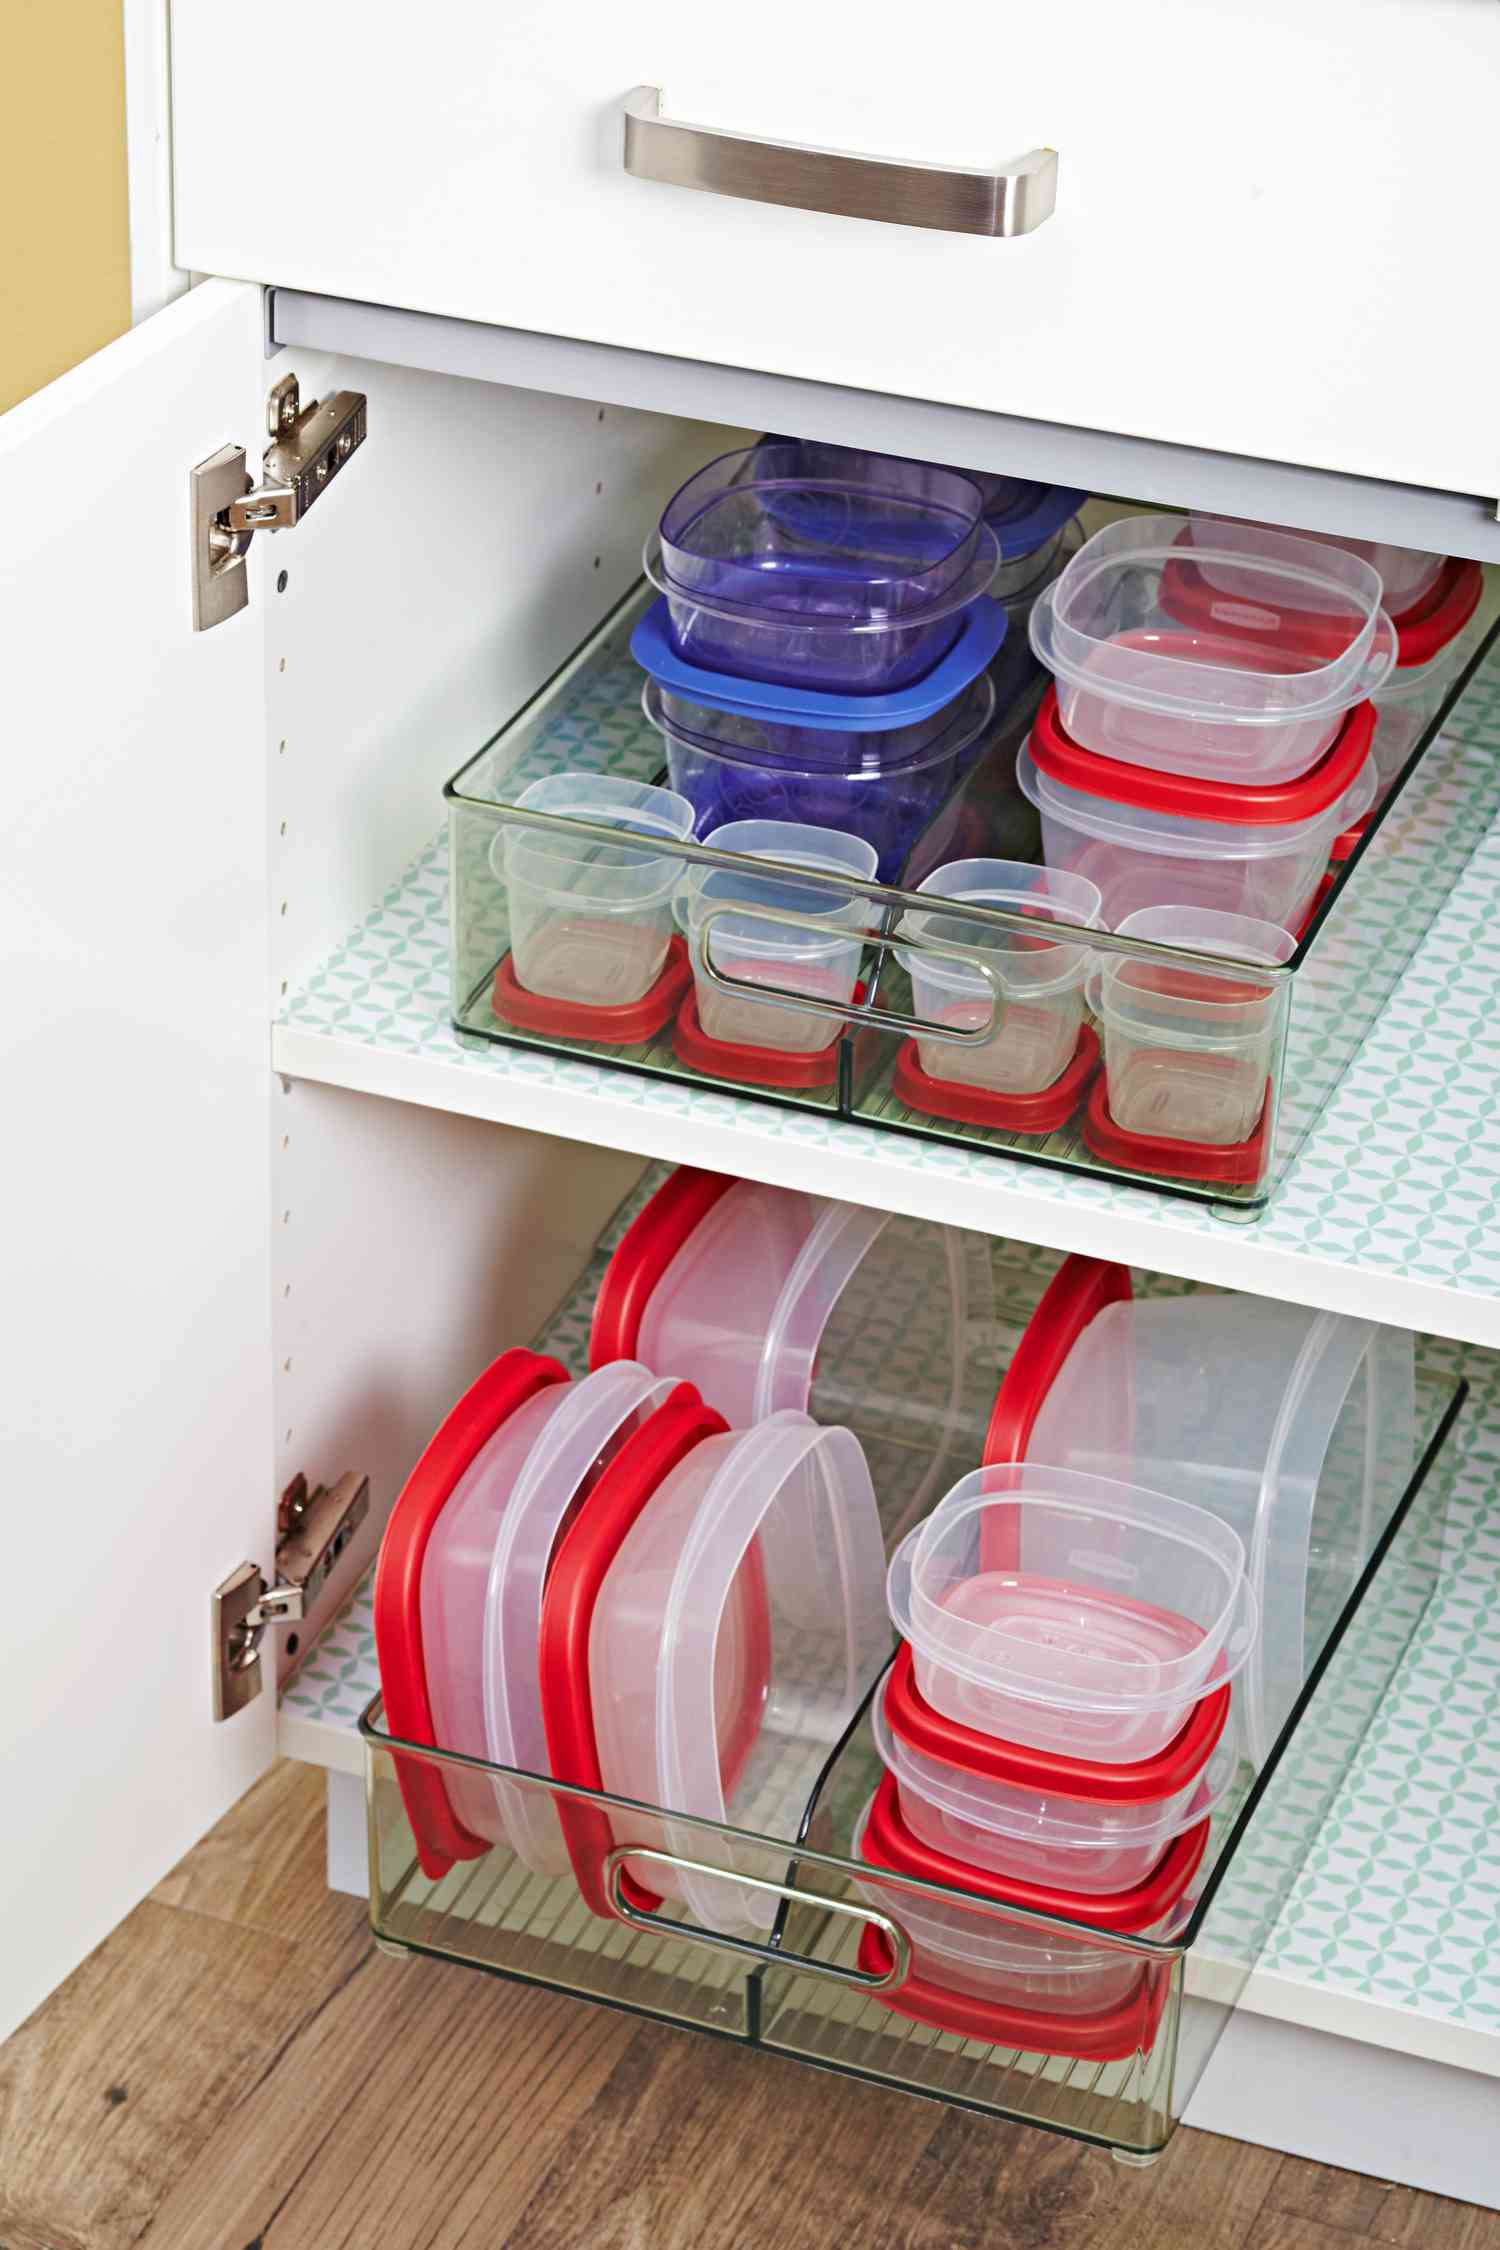 cupboard of food storage containers organized in plastic bins